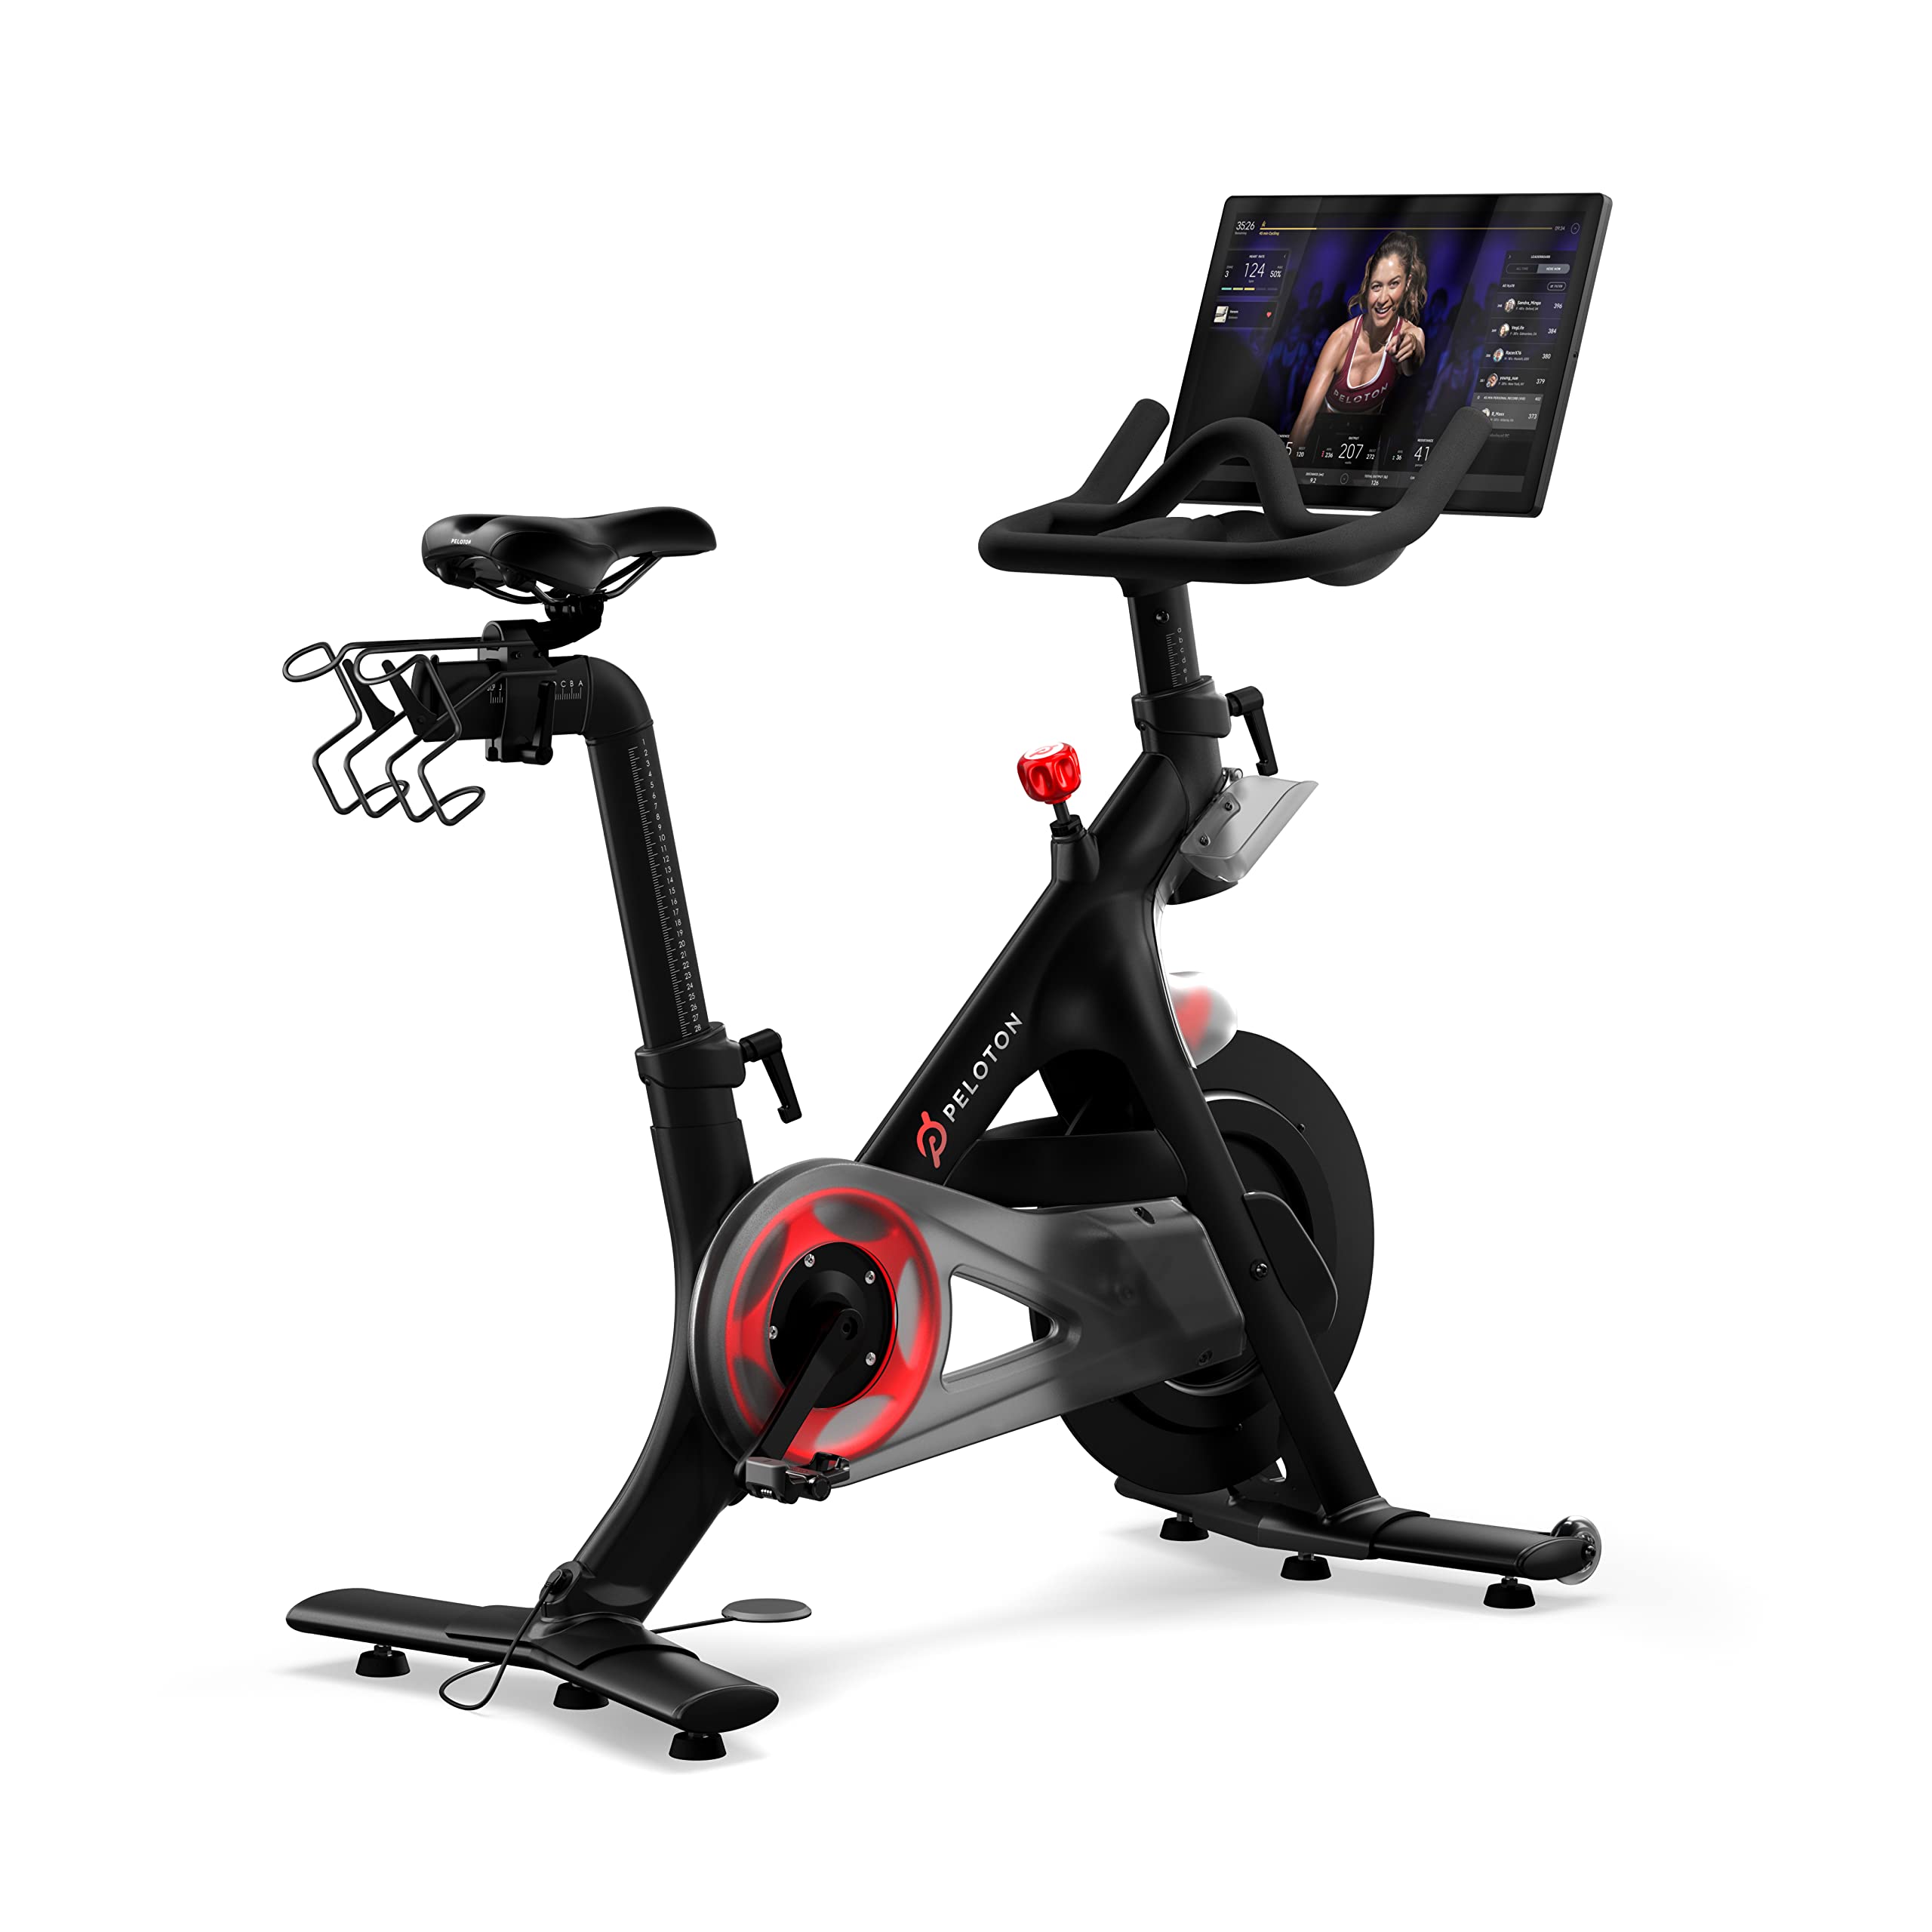 Original Peloton Bike _ Indoor Stationary Exercise Bike with Immersive 22_ HD Touchscreen (Updated Seat Post)>